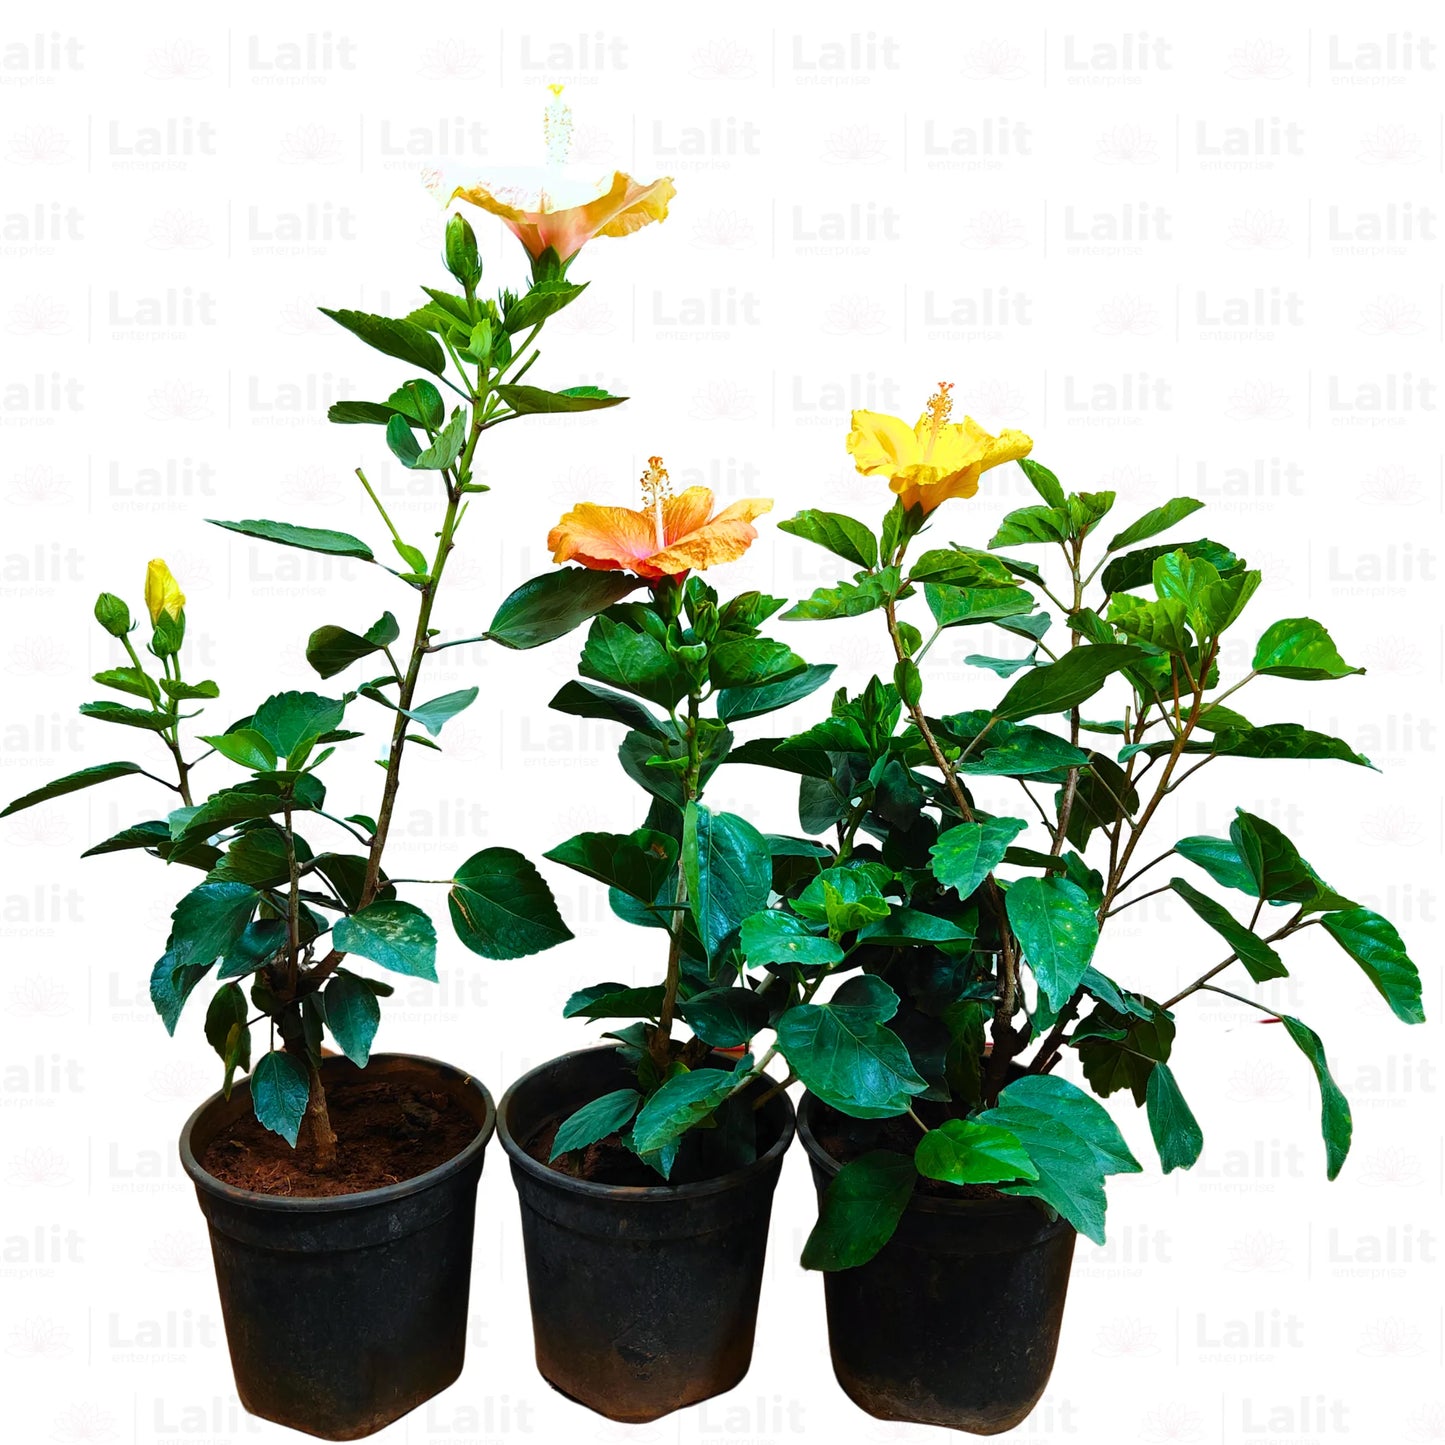 Buy American Hibiscus "Pack of 3" - Plant Online at Lalitenterprise